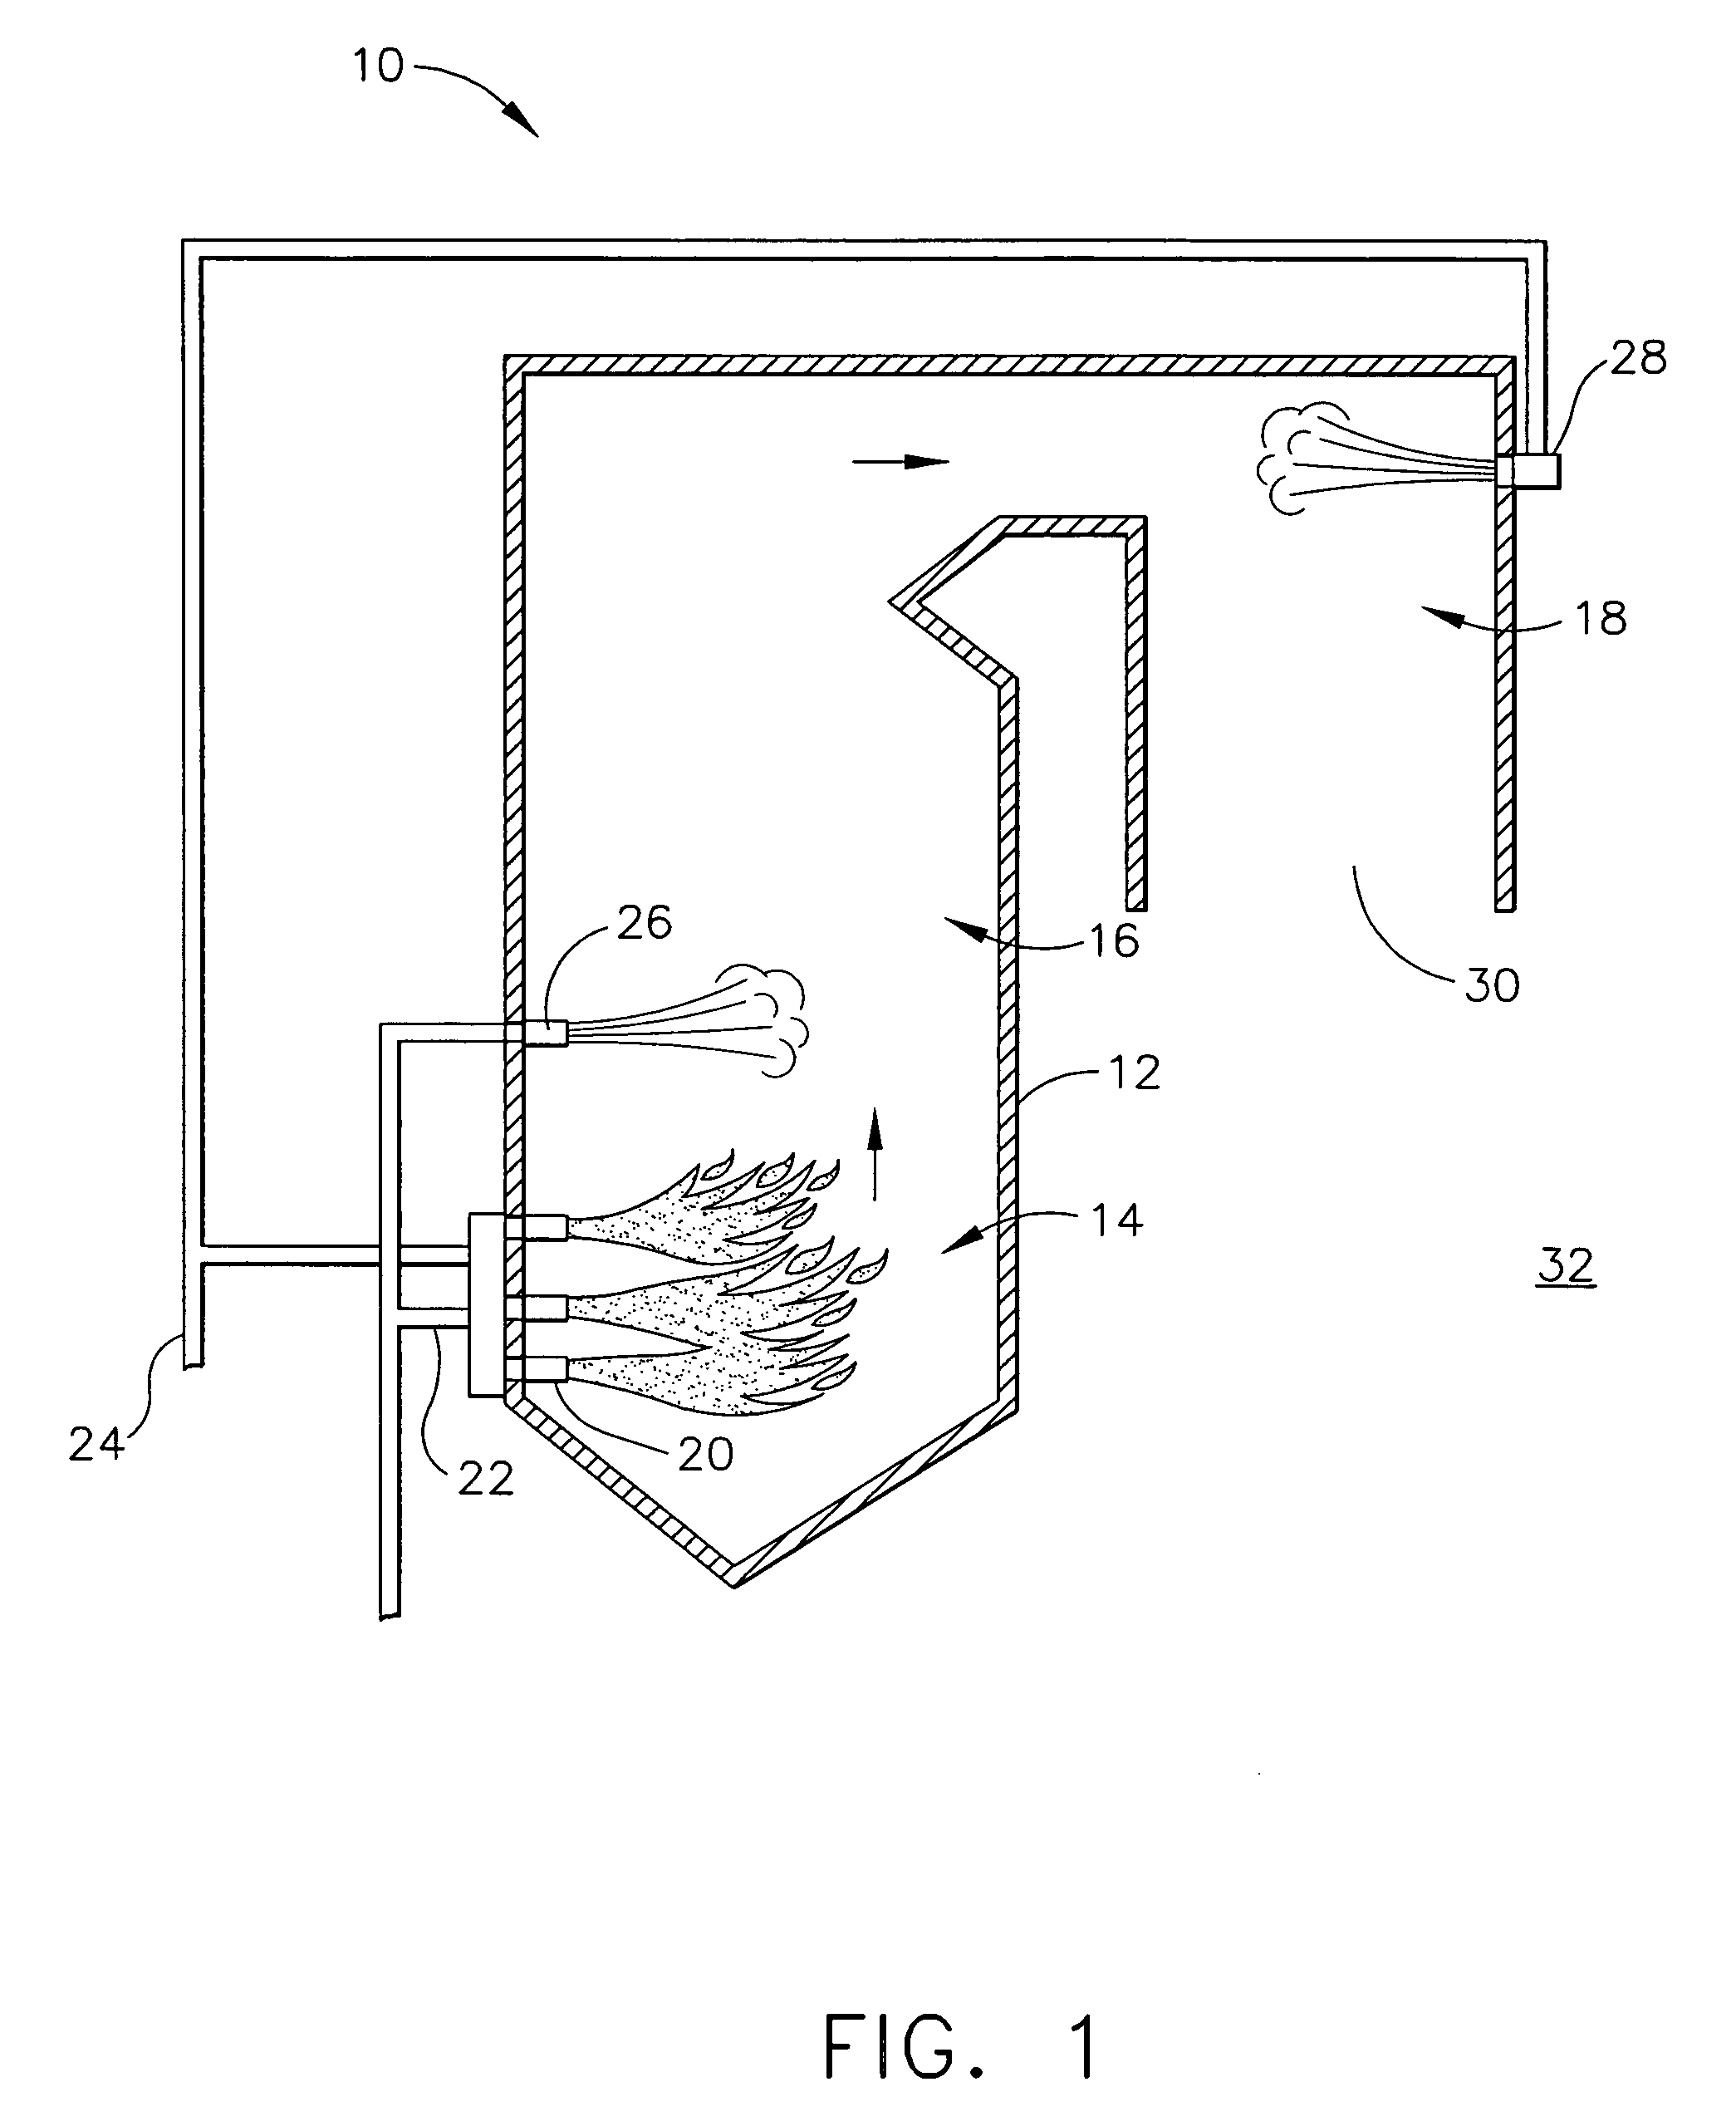 Methods and systems for operating combustion systems